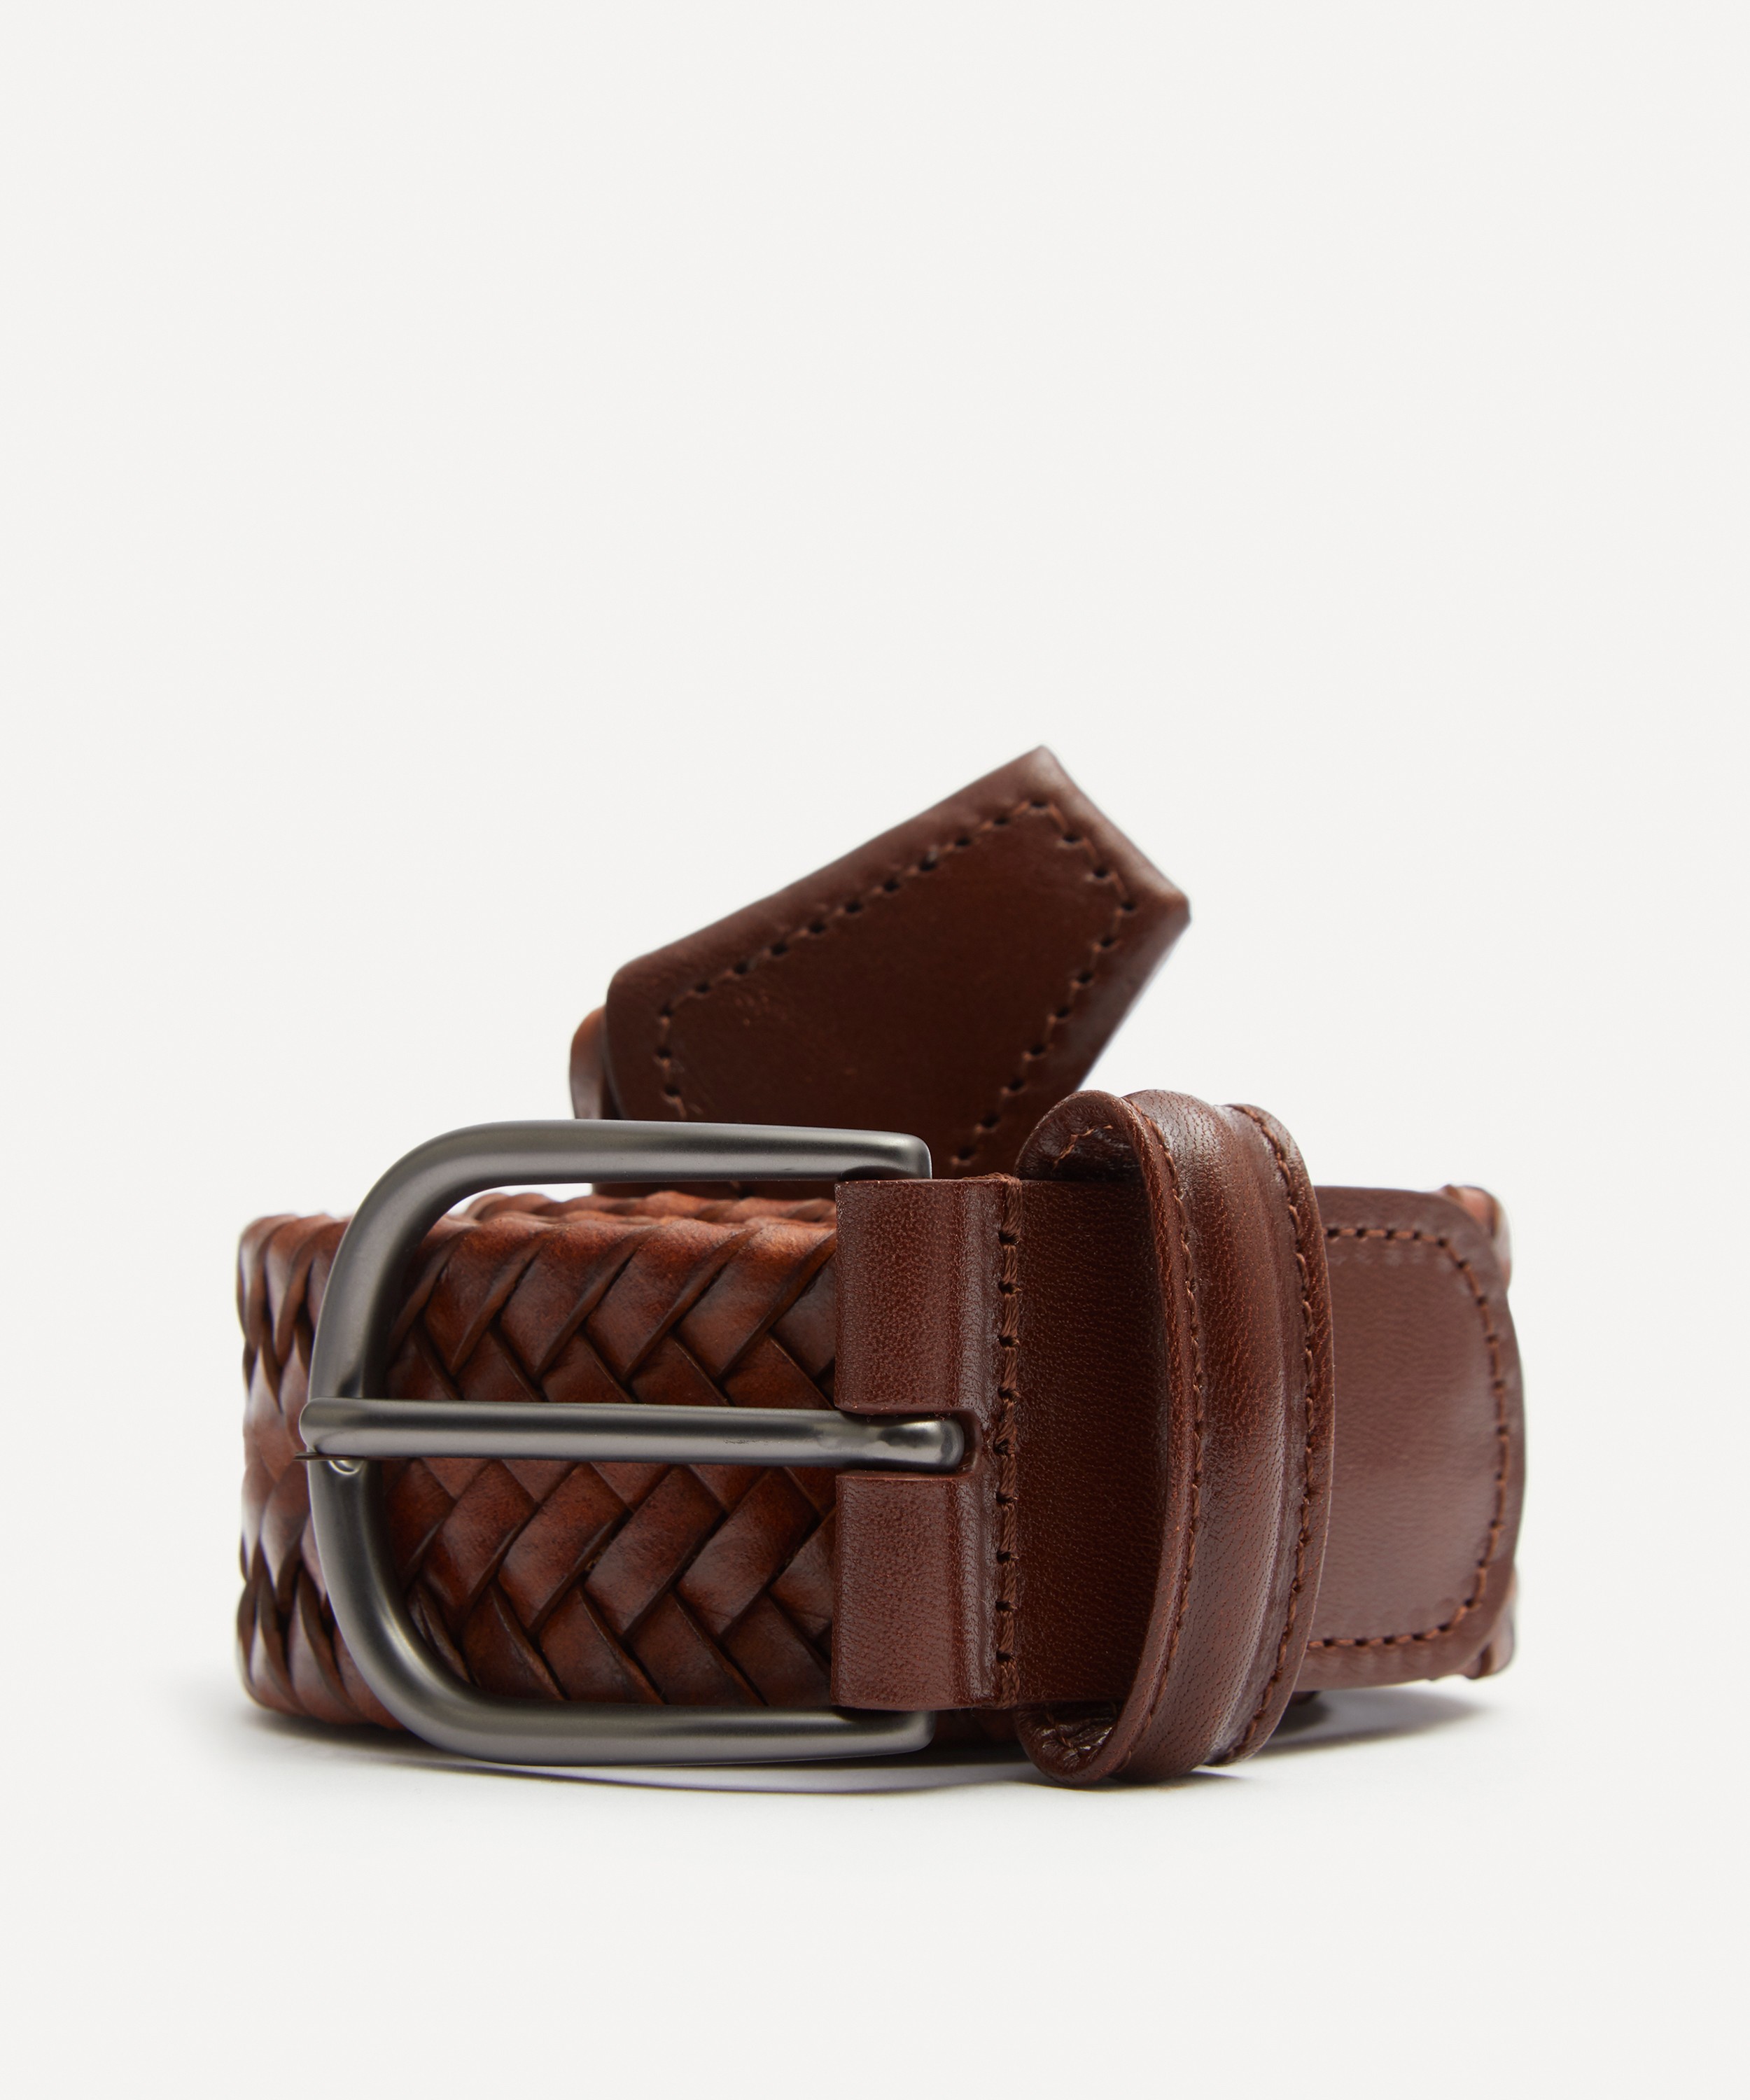 Anderson's 3cm Woven Leather Belt in Brown for Men